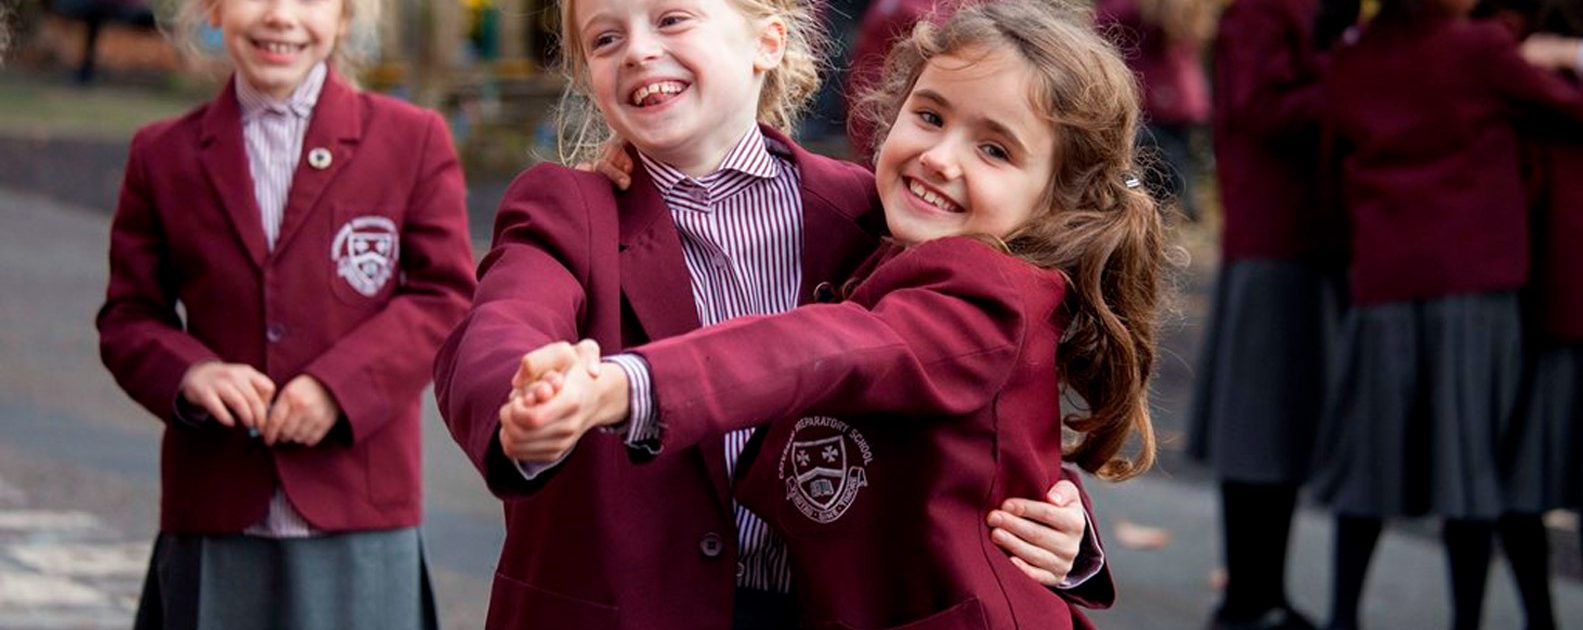 Caterham Prep School: Finalists in the Independent Schools of the Year 2019